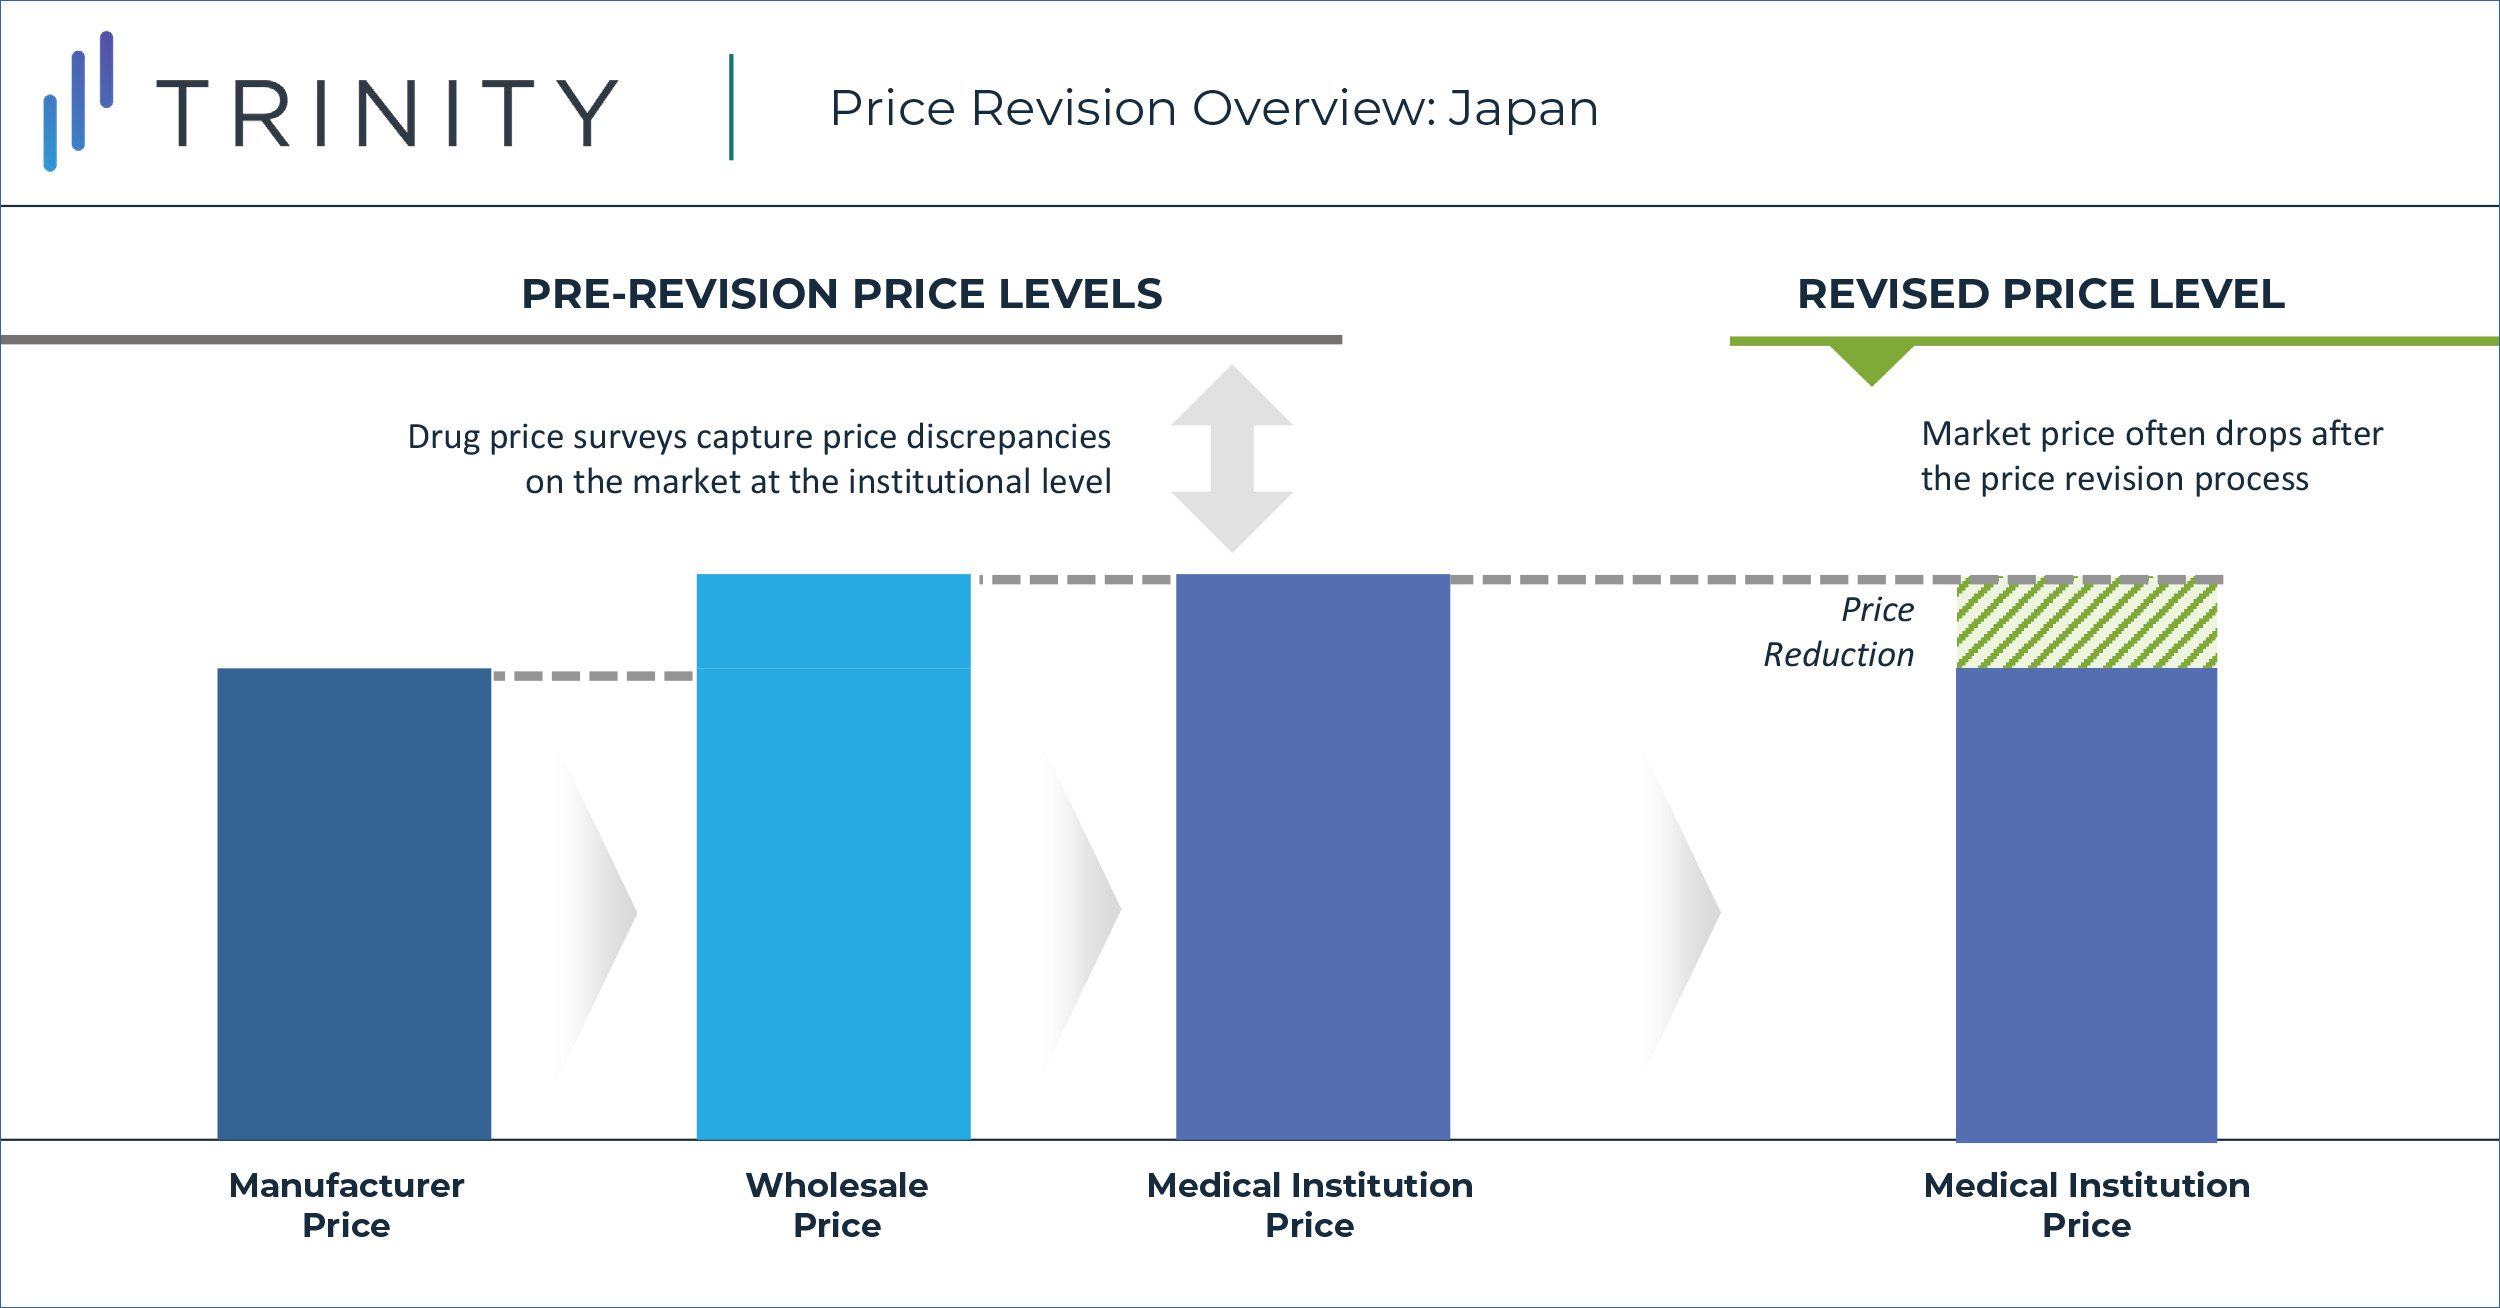 Price Revision Overview: Japan